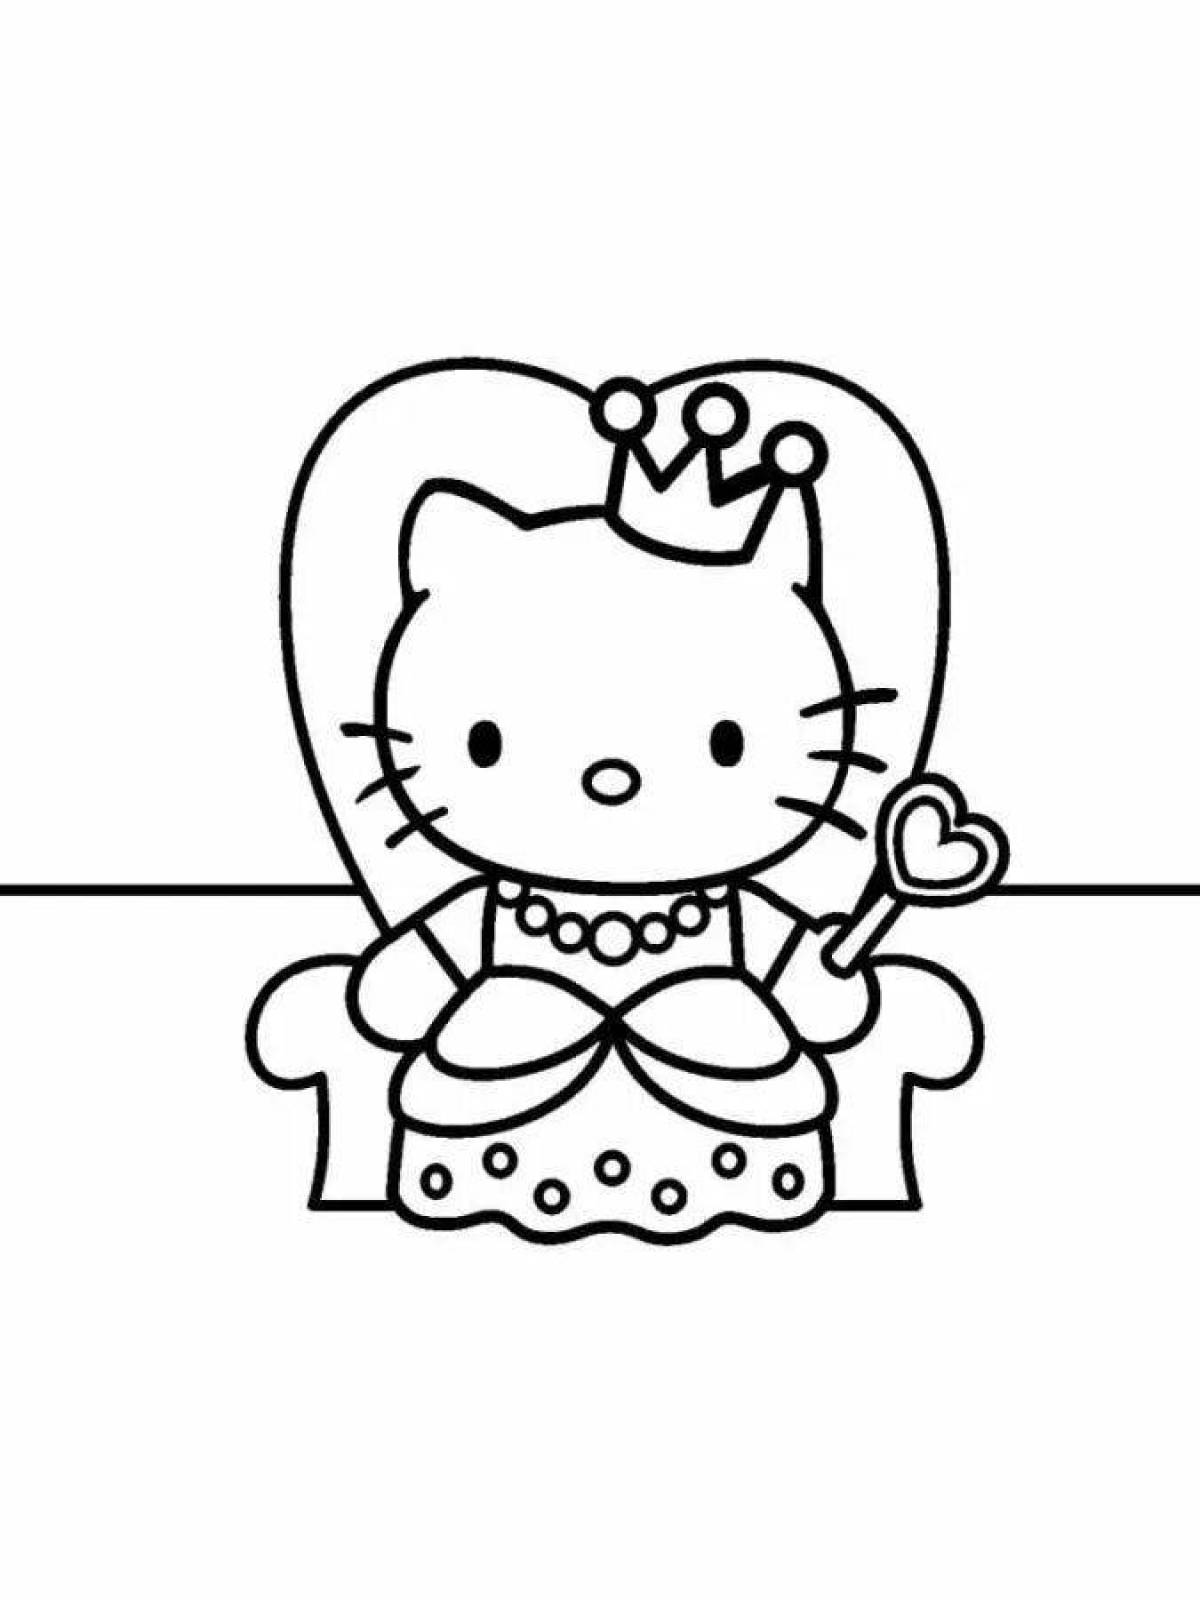 Joyful coloring hello kitty and friends